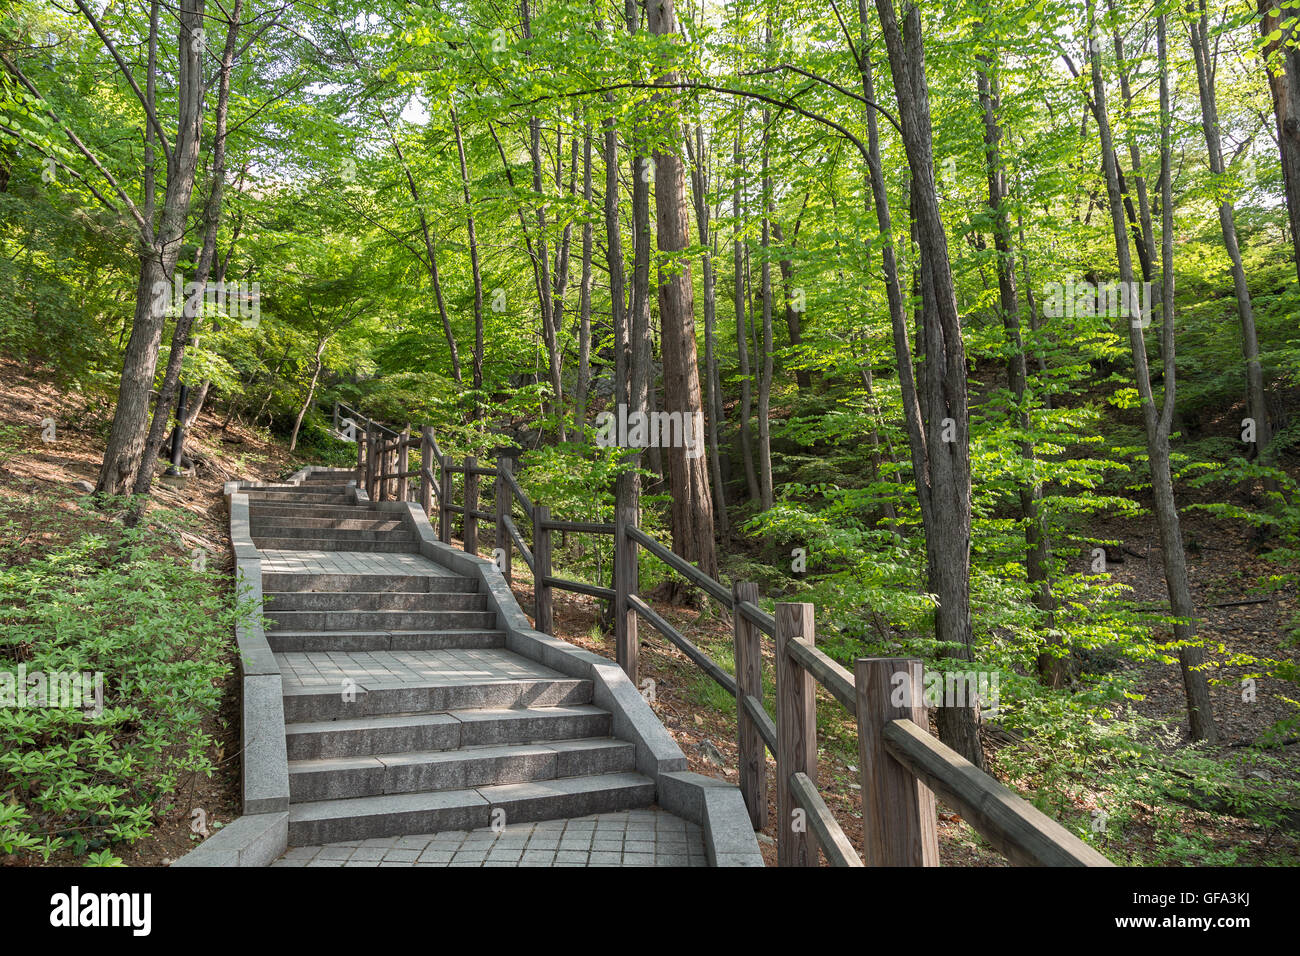 Stairway in a lush and verdant forest at the Namsan Hill (or Namsan Park or Namsan Mountain) in Seoul, South Korea. Stock Photo